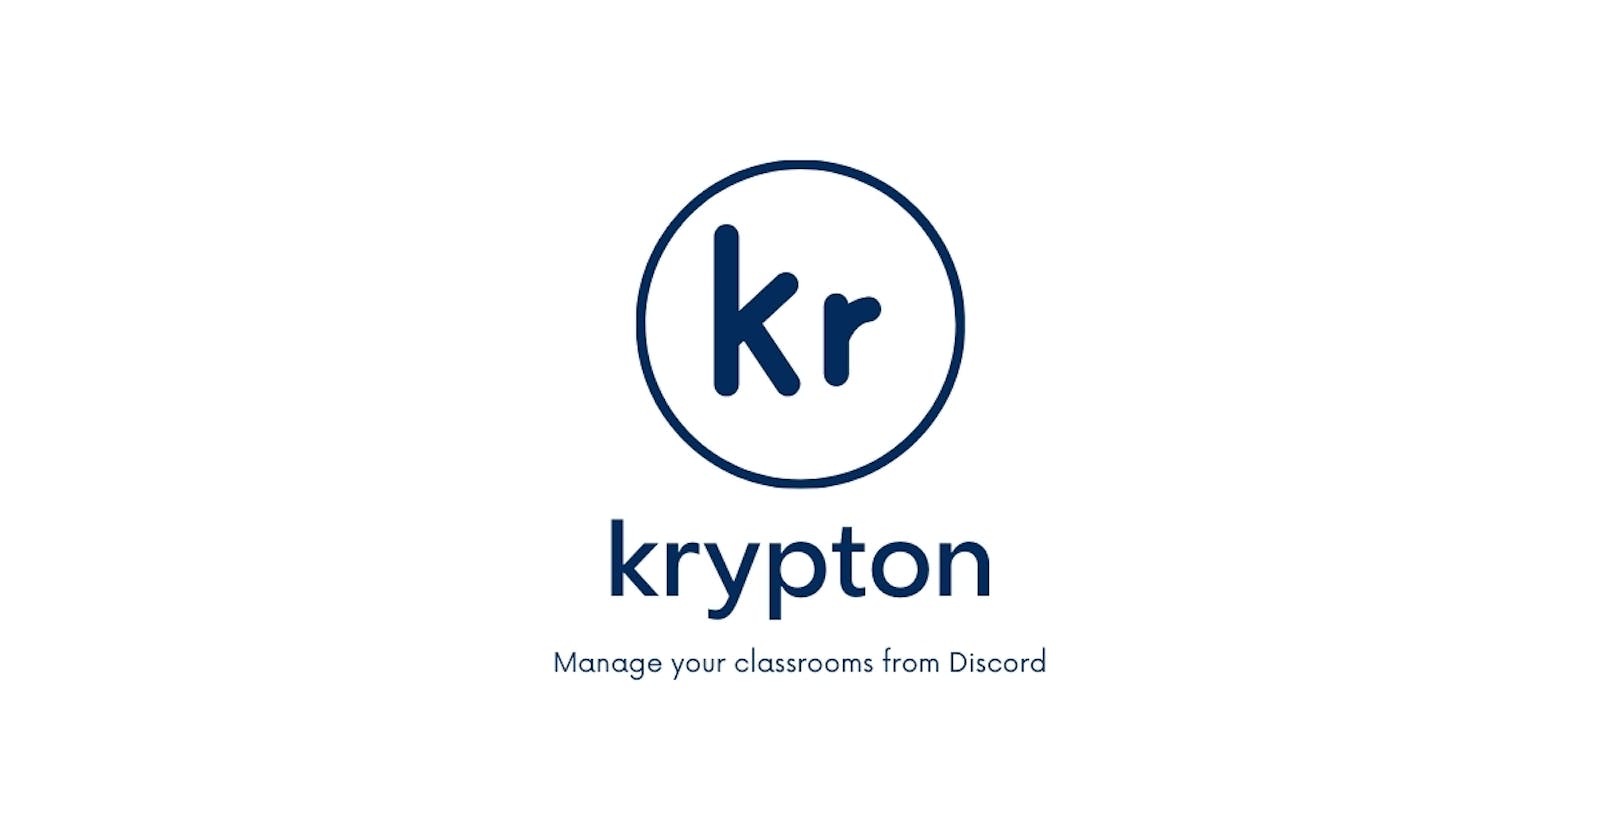 Introducing krypton - A Discord Classroom Manager Bot 🧑‍🏫